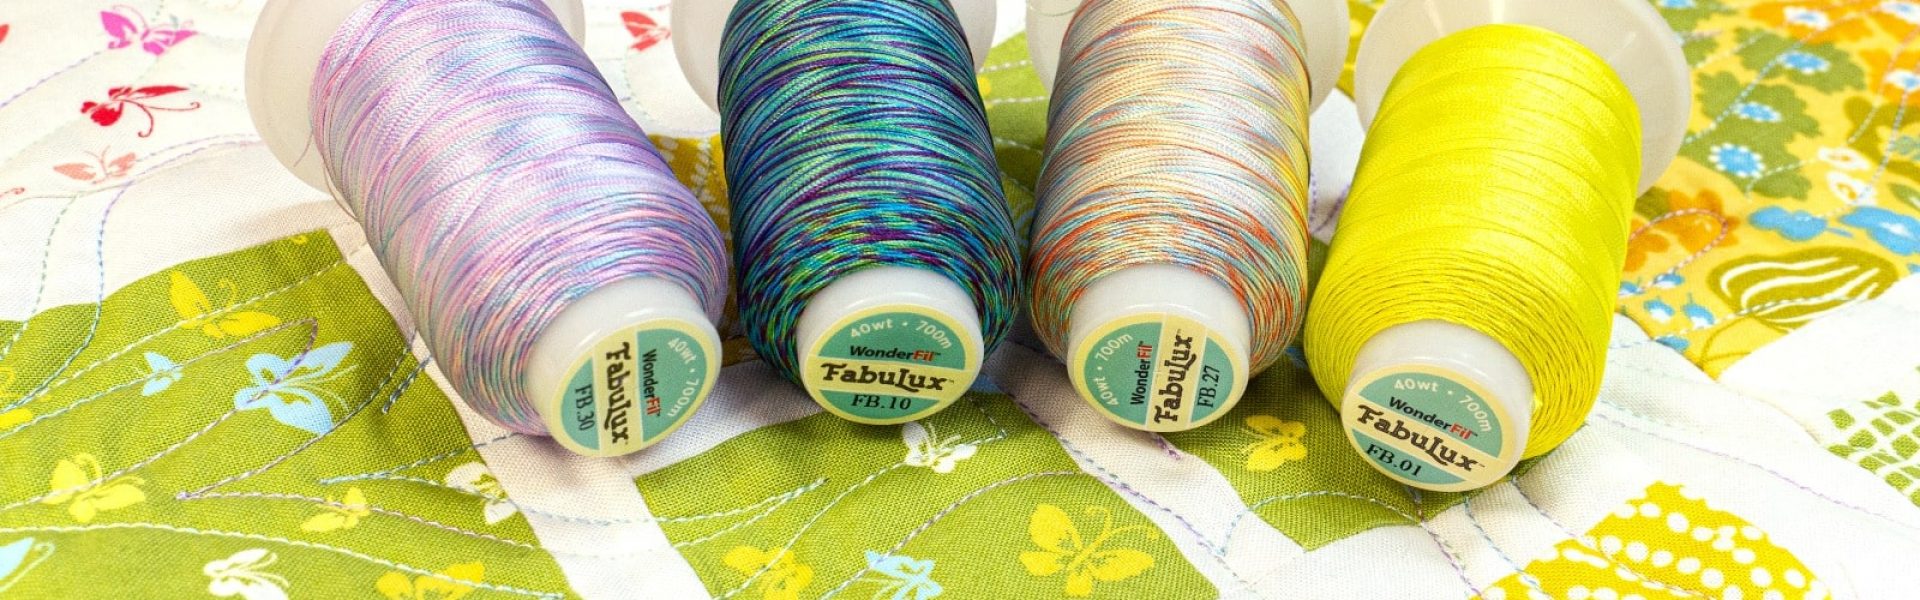 A photo of spools of FabuLux 40wt trilobal polyester thread on a quilt.